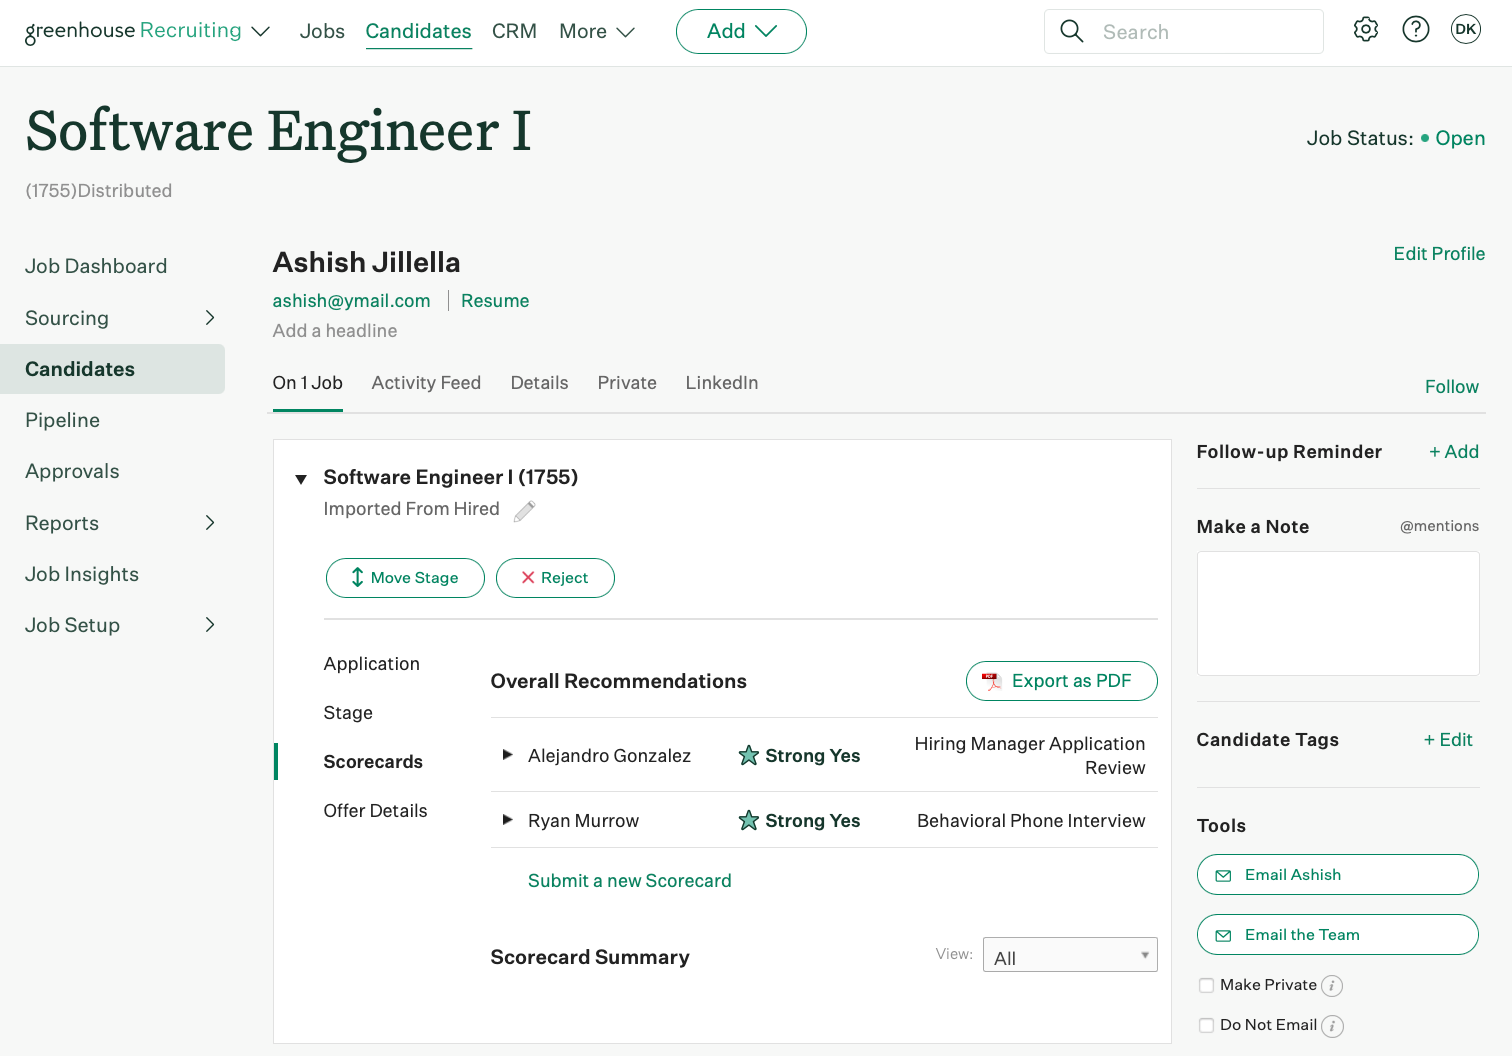 A candidate named Ashish is shown on the Software Engineer 1 job with all pipeline scorecards transferred to the matching stages